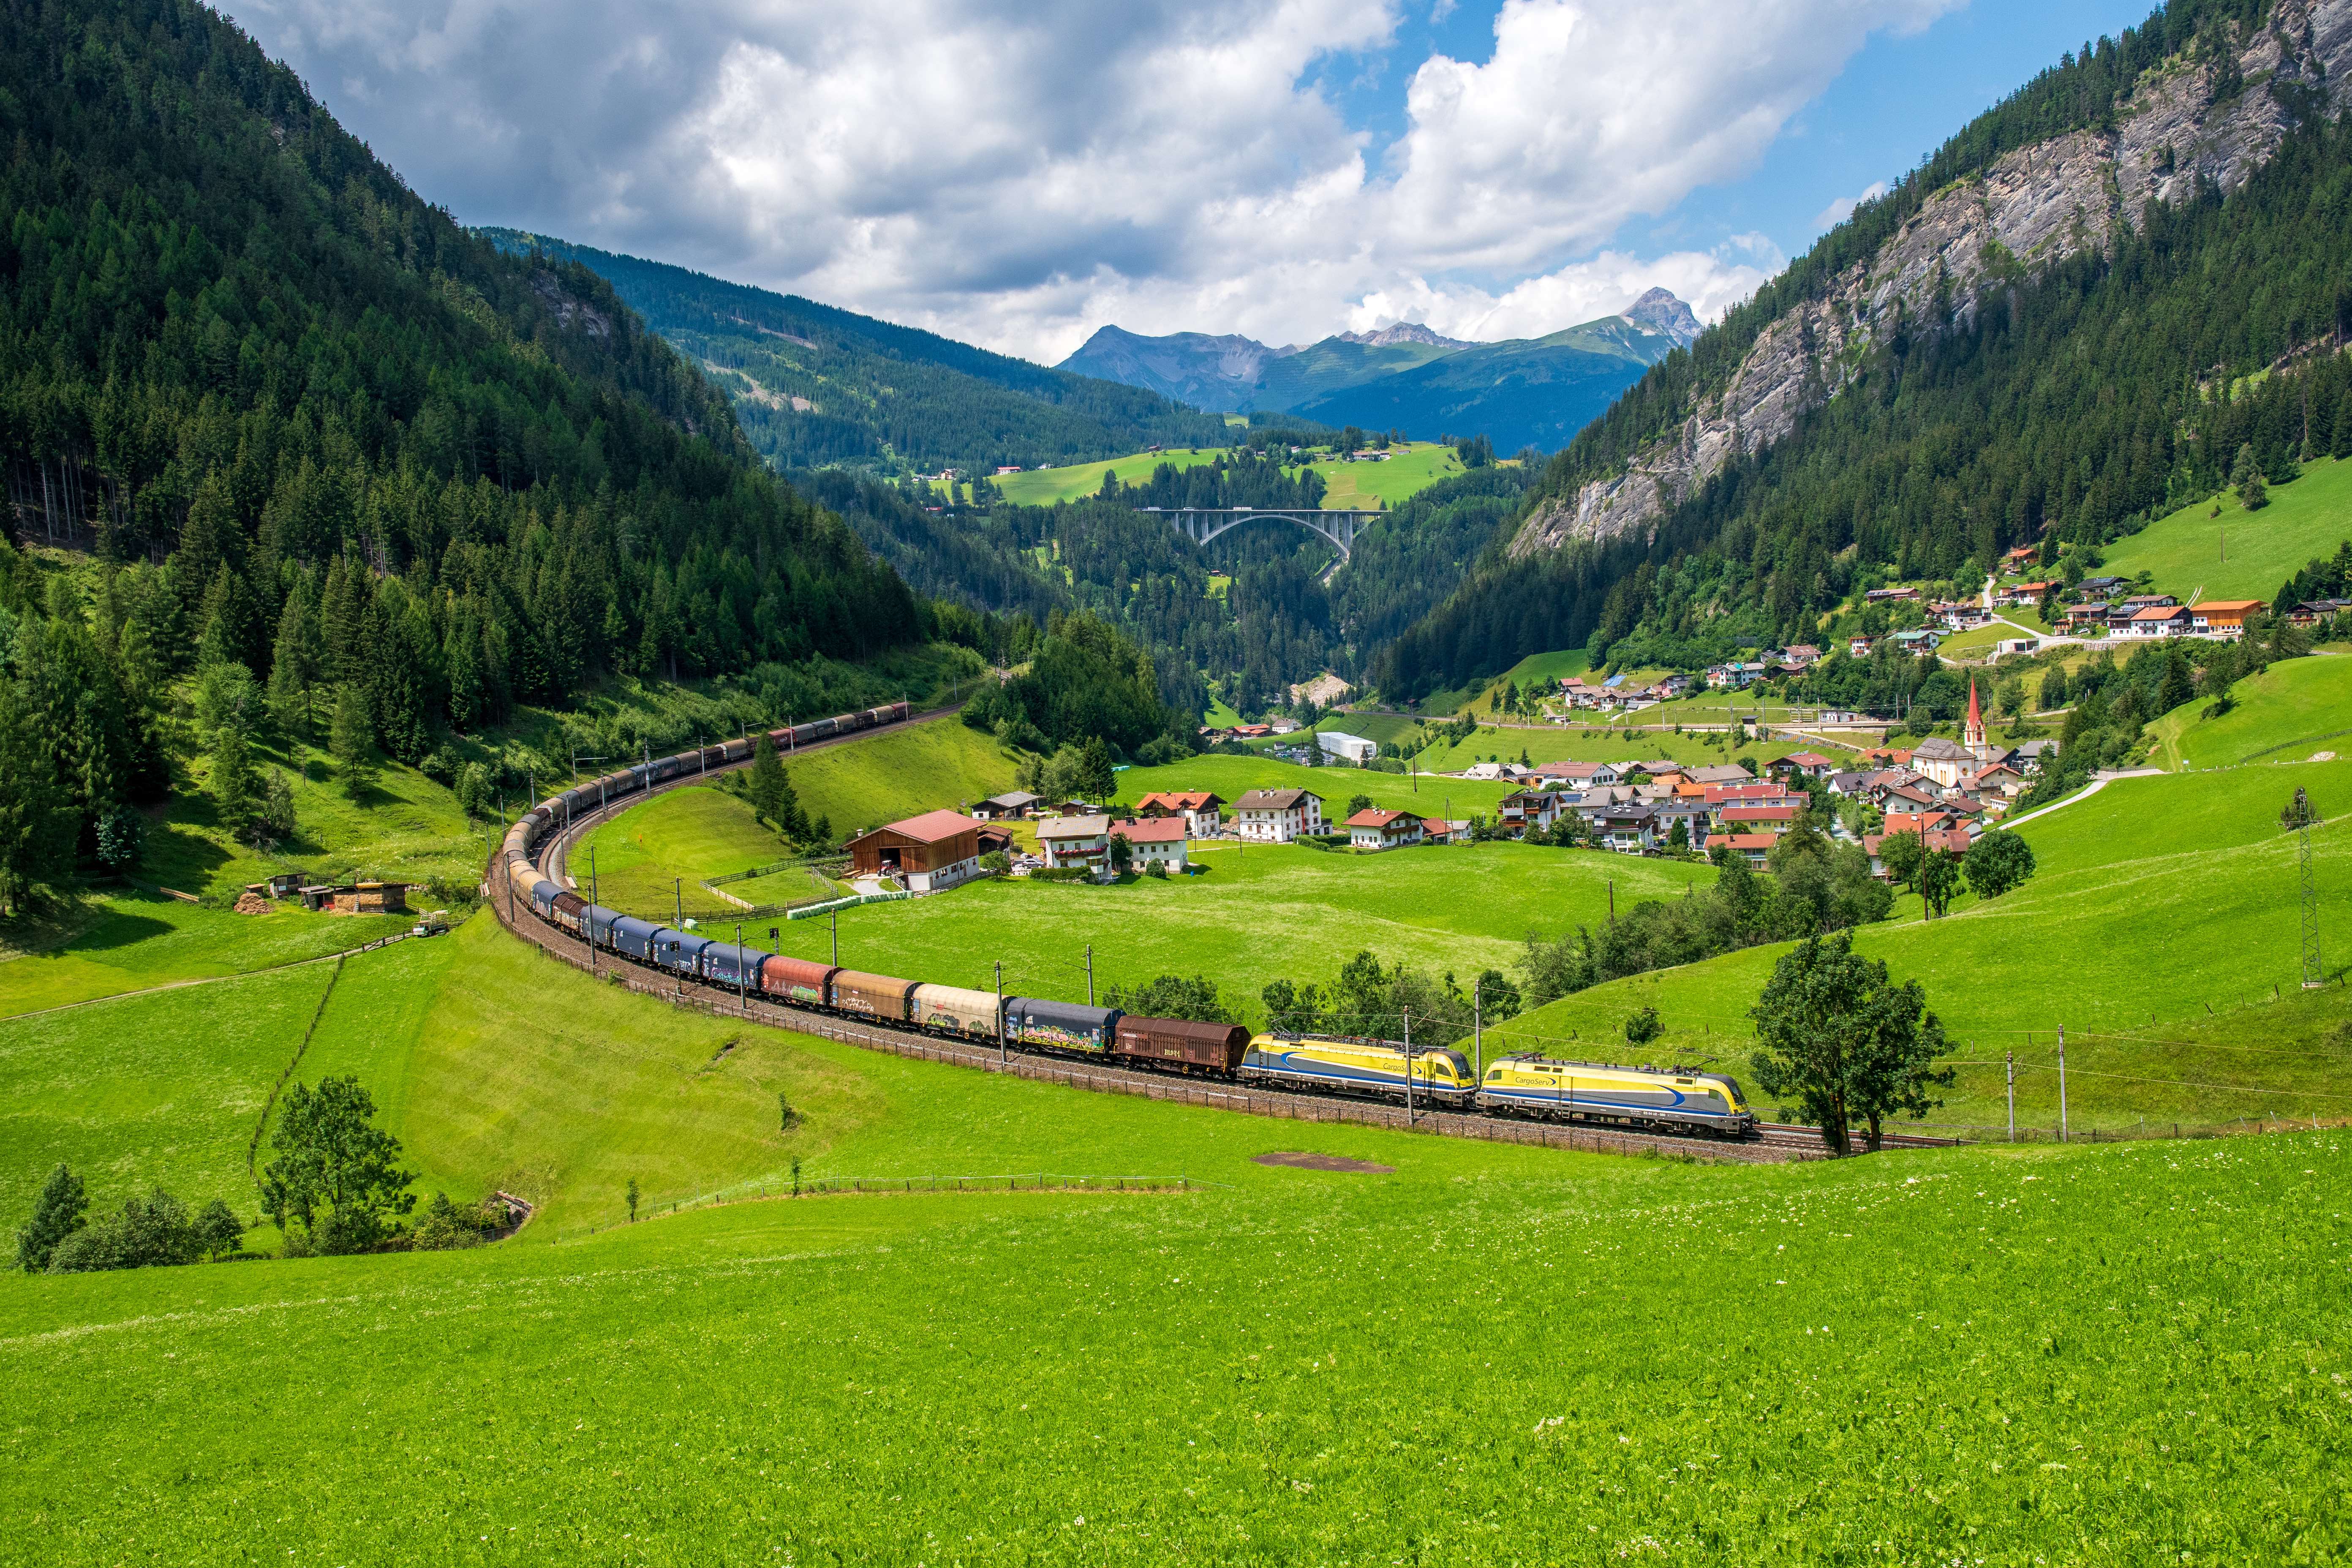 Freight train from Brennero